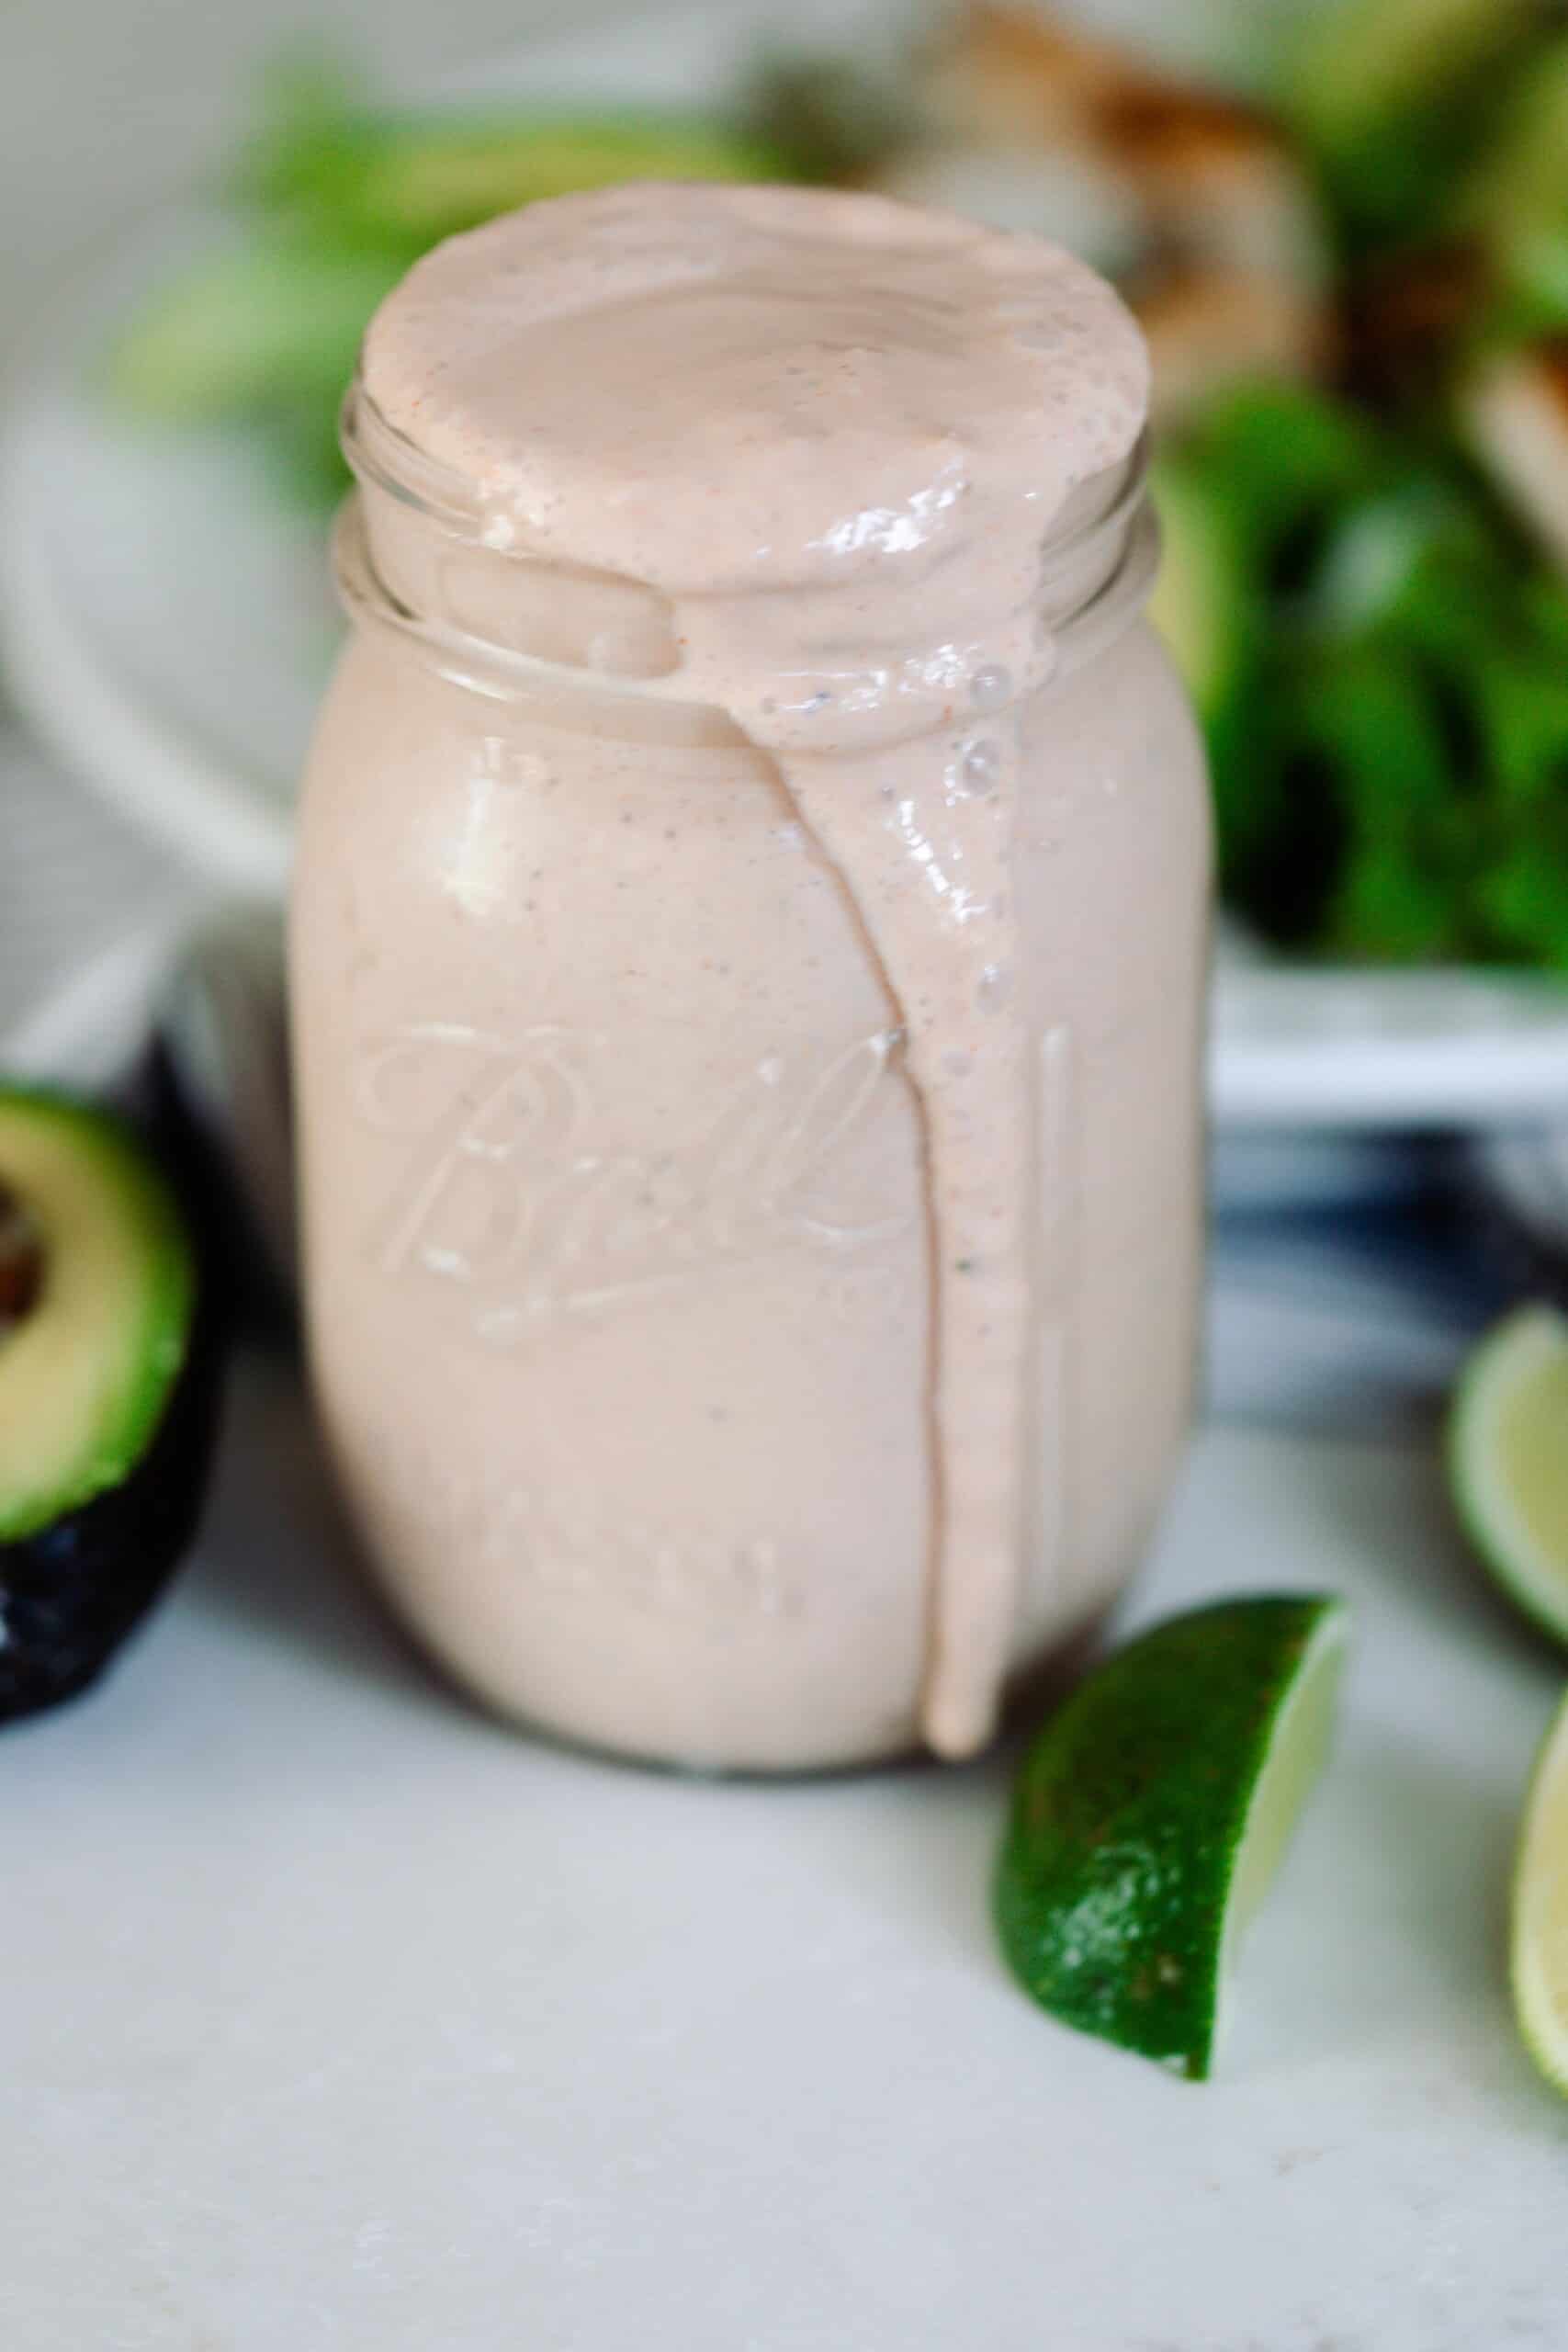 Mexican ranch dressing in a mason jar wit the dressing spilling over the top. Sliced limes and avocados lay on the counter around the jar of ranch